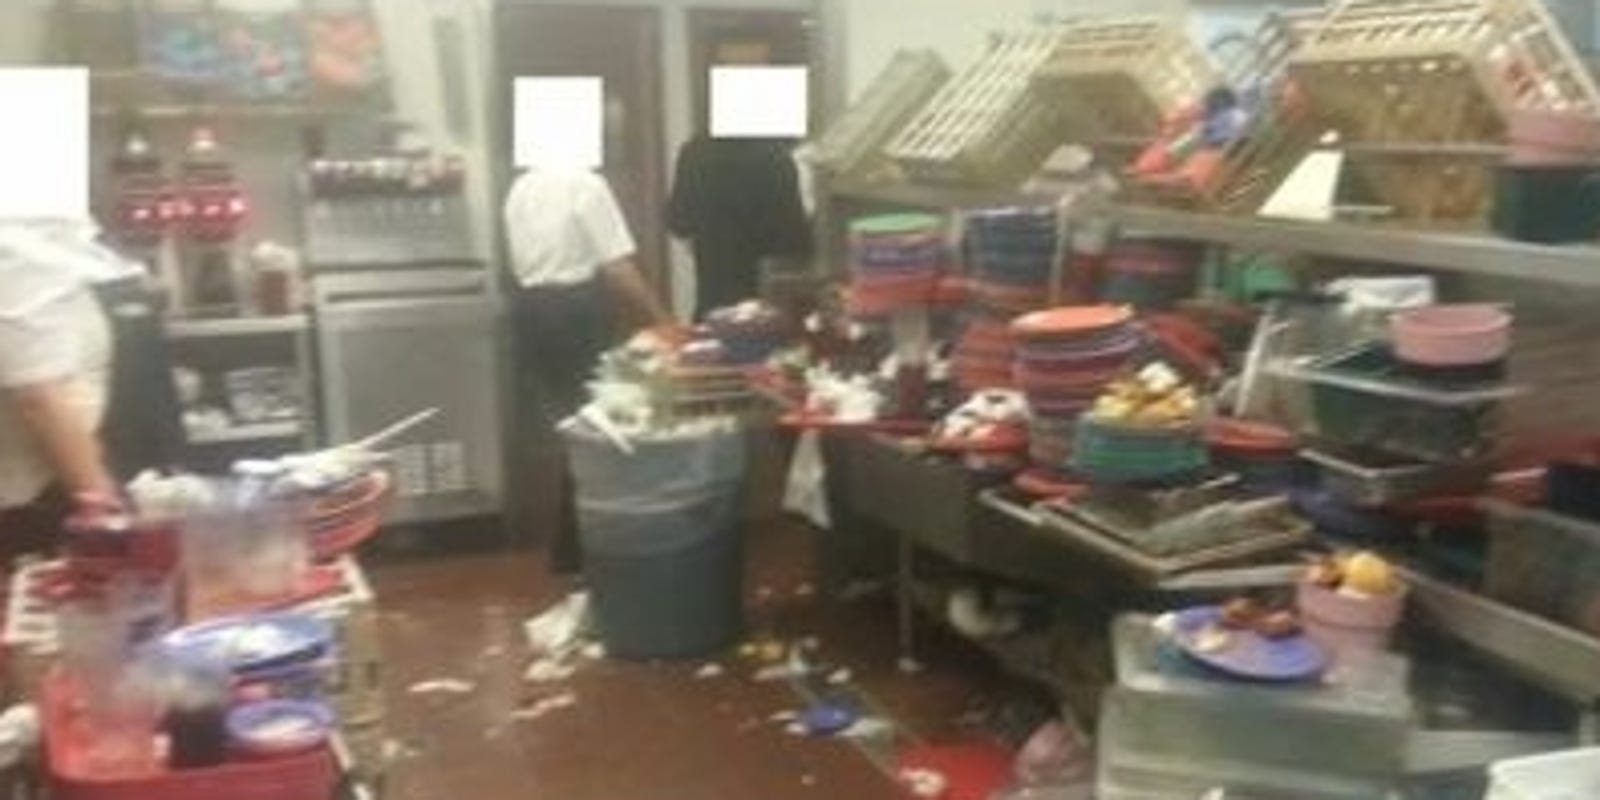 Golden Corral accused of unsanitary practices